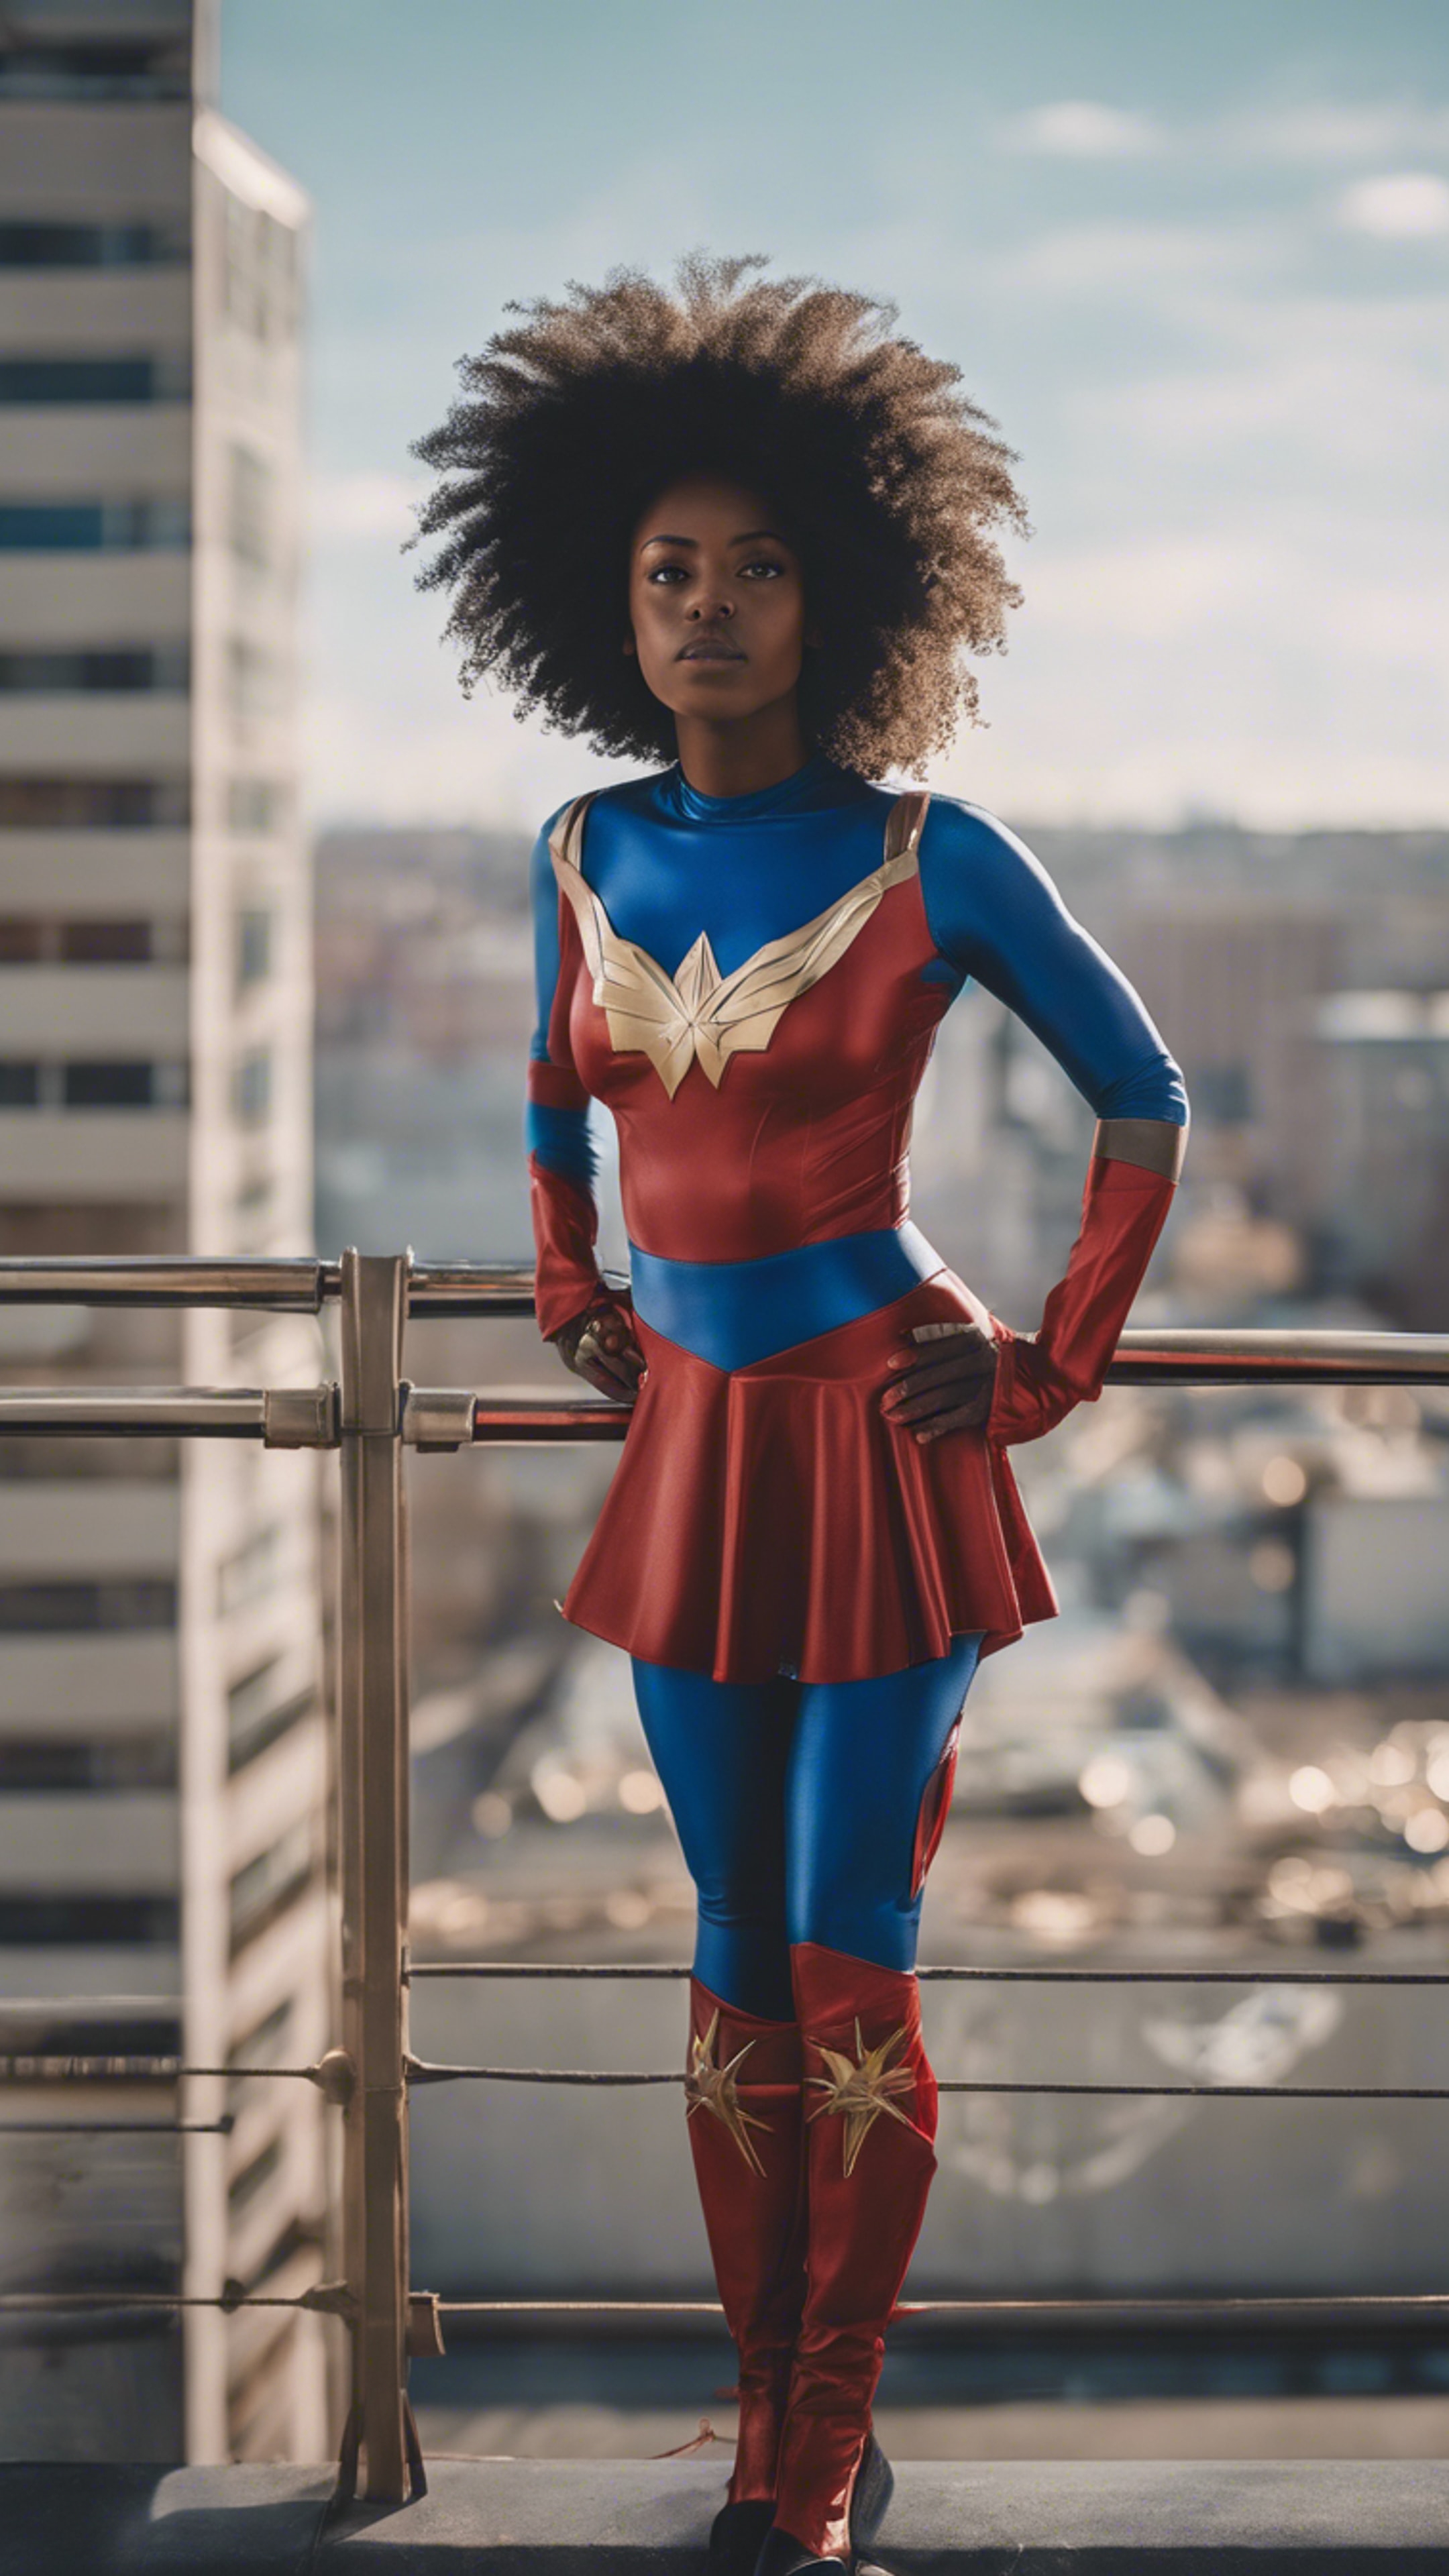 A black girl wearing a superhero costume, standing strong on top of a tall building. Tapet[591a0dfe38314cf2b9da]